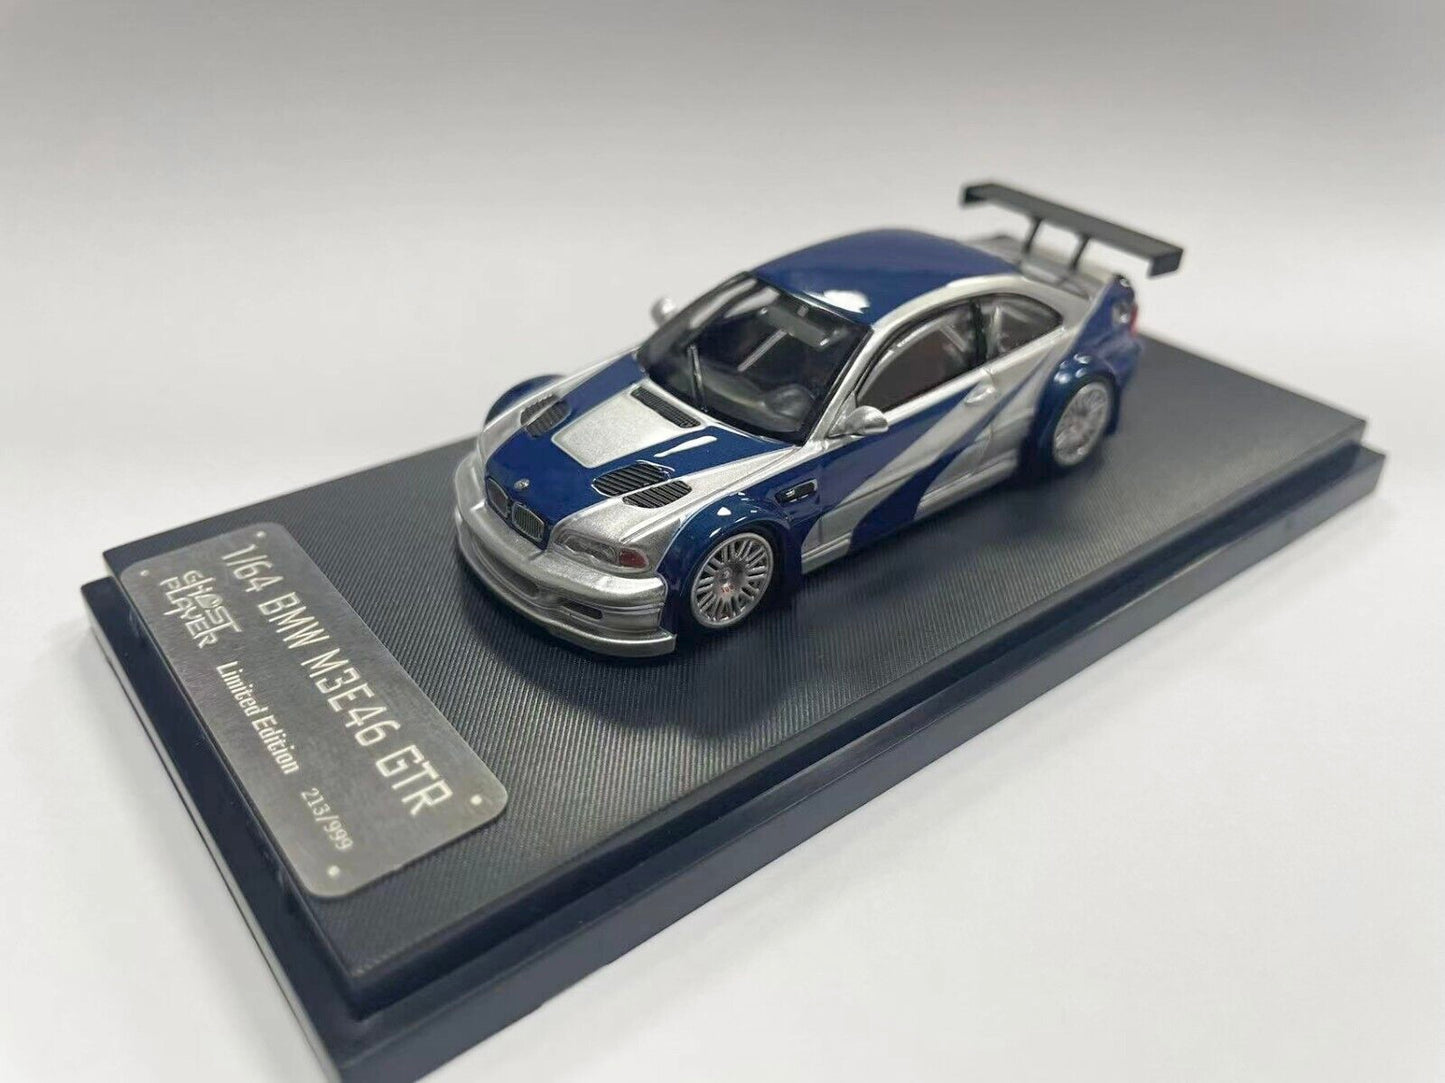 Ghost Player 1:64 BMW M3 E46 GTR - Need For Speed